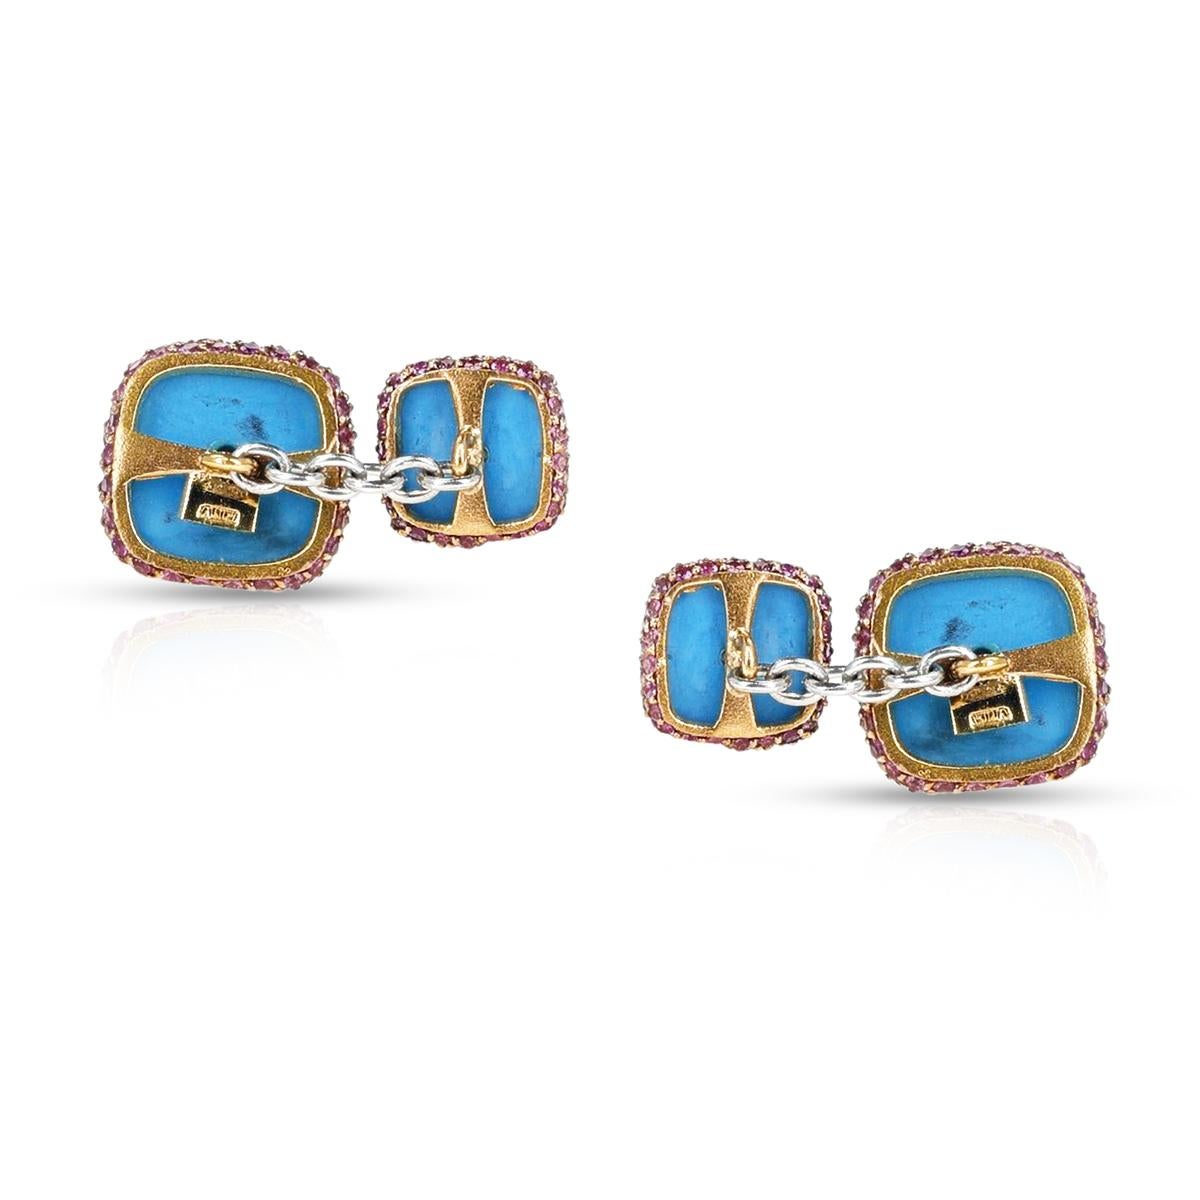 A Vita Turquoise and Pink Sapphire Cufflinks, 18k. The pink sapphire weighs appx. 2.50 carats. The total weight of the cufflinks are 12.74 grams. 